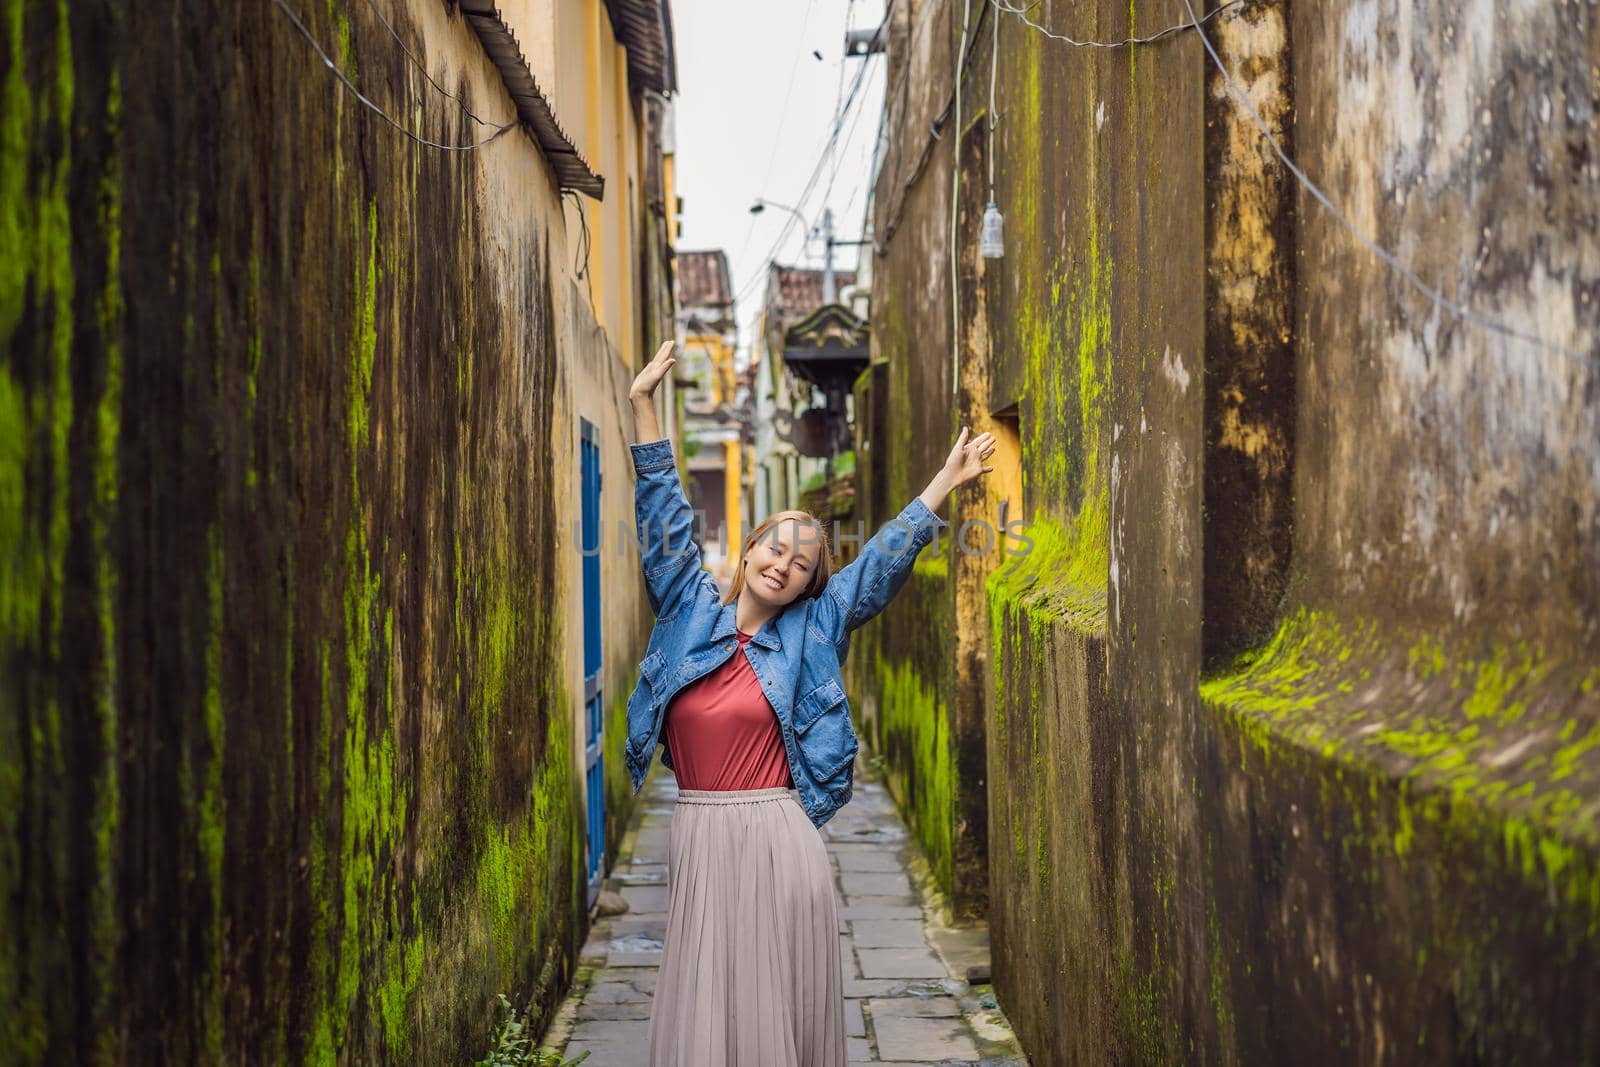 Woman tourist on background of Hoi An ancient town, Vietnam. Vietnam opens to tourists again after quarantine Coronovirus COVID 19 by galitskaya